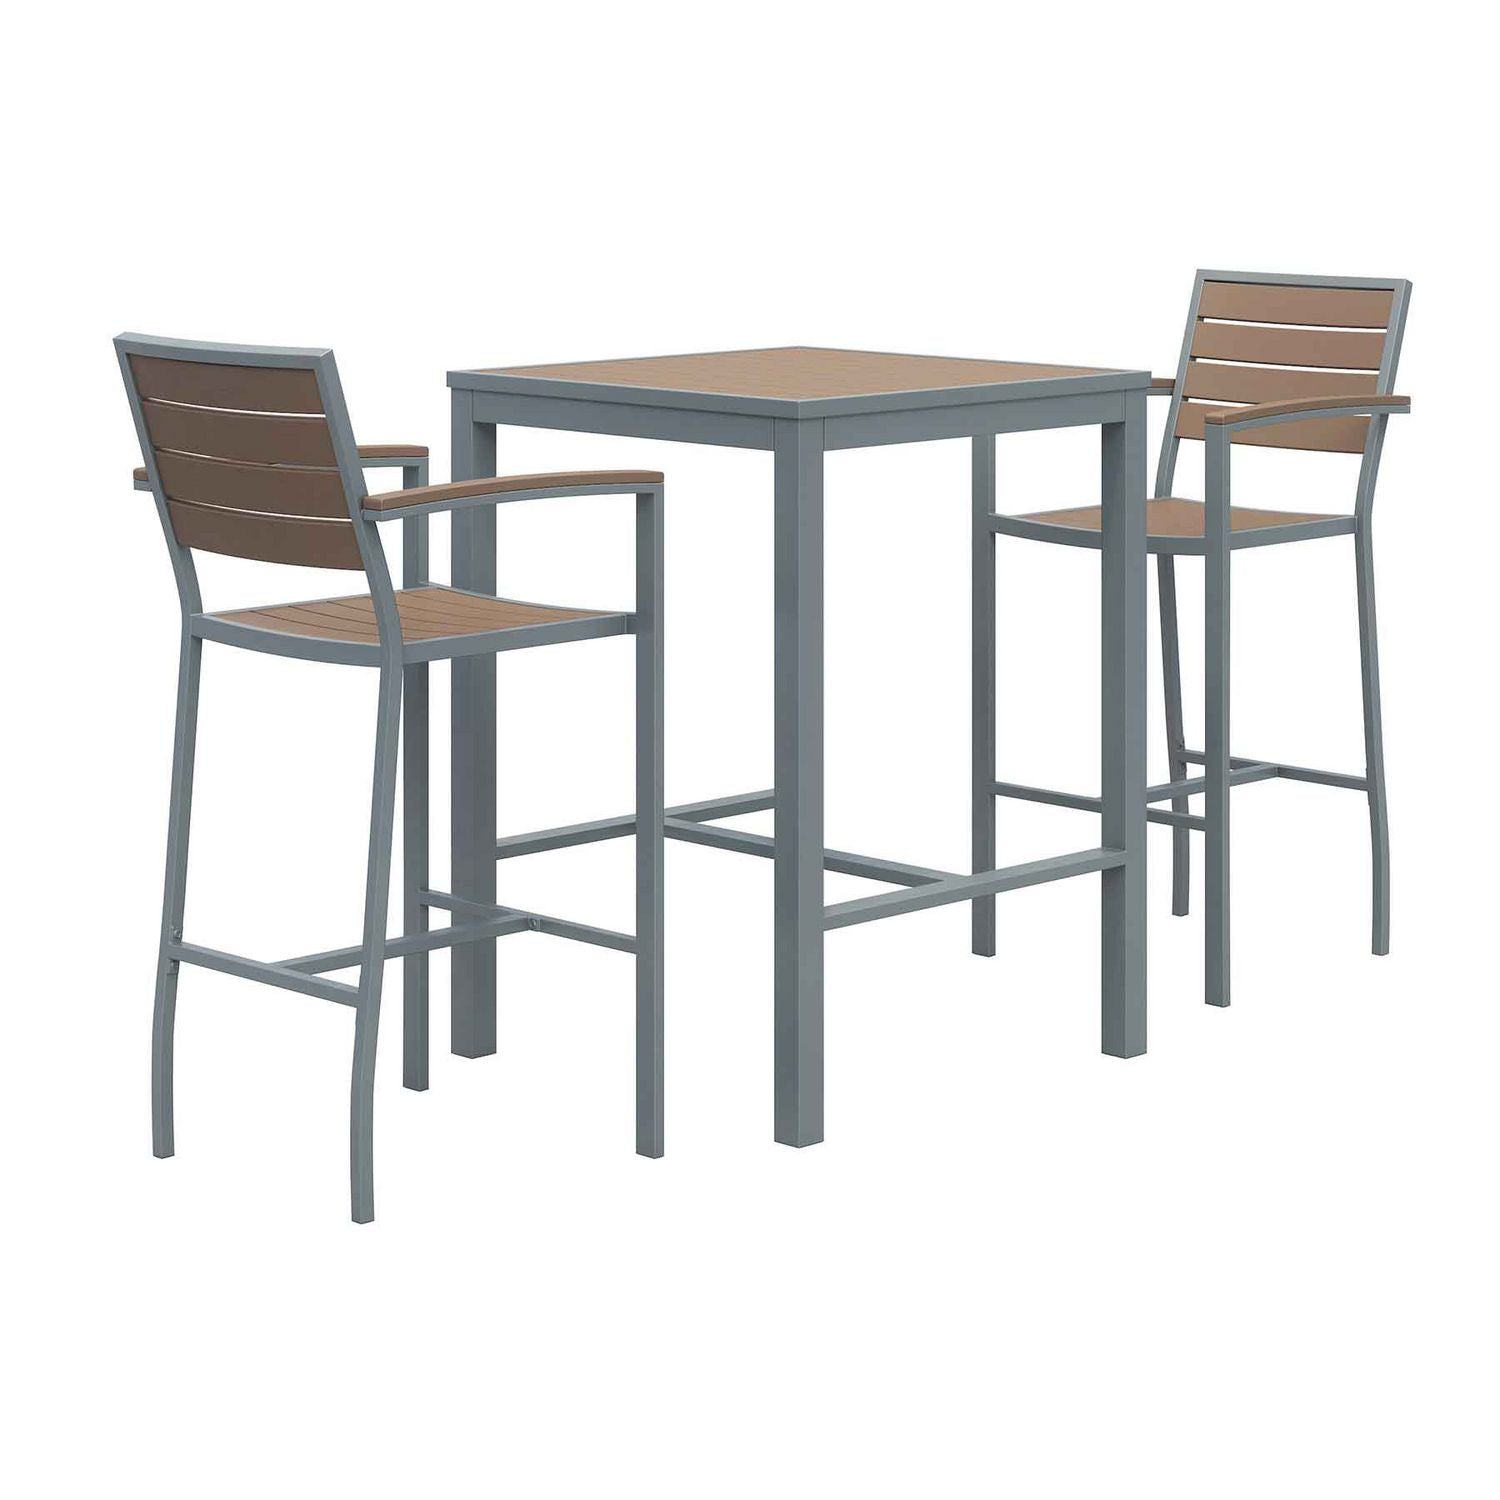 eveleen-outdoor-bistro-patio-table-with-two-mocha-powder-coated-polymer-barstools-30-square-mocha-ships-in-4-6-bus-days_kfi840031925251 - 1